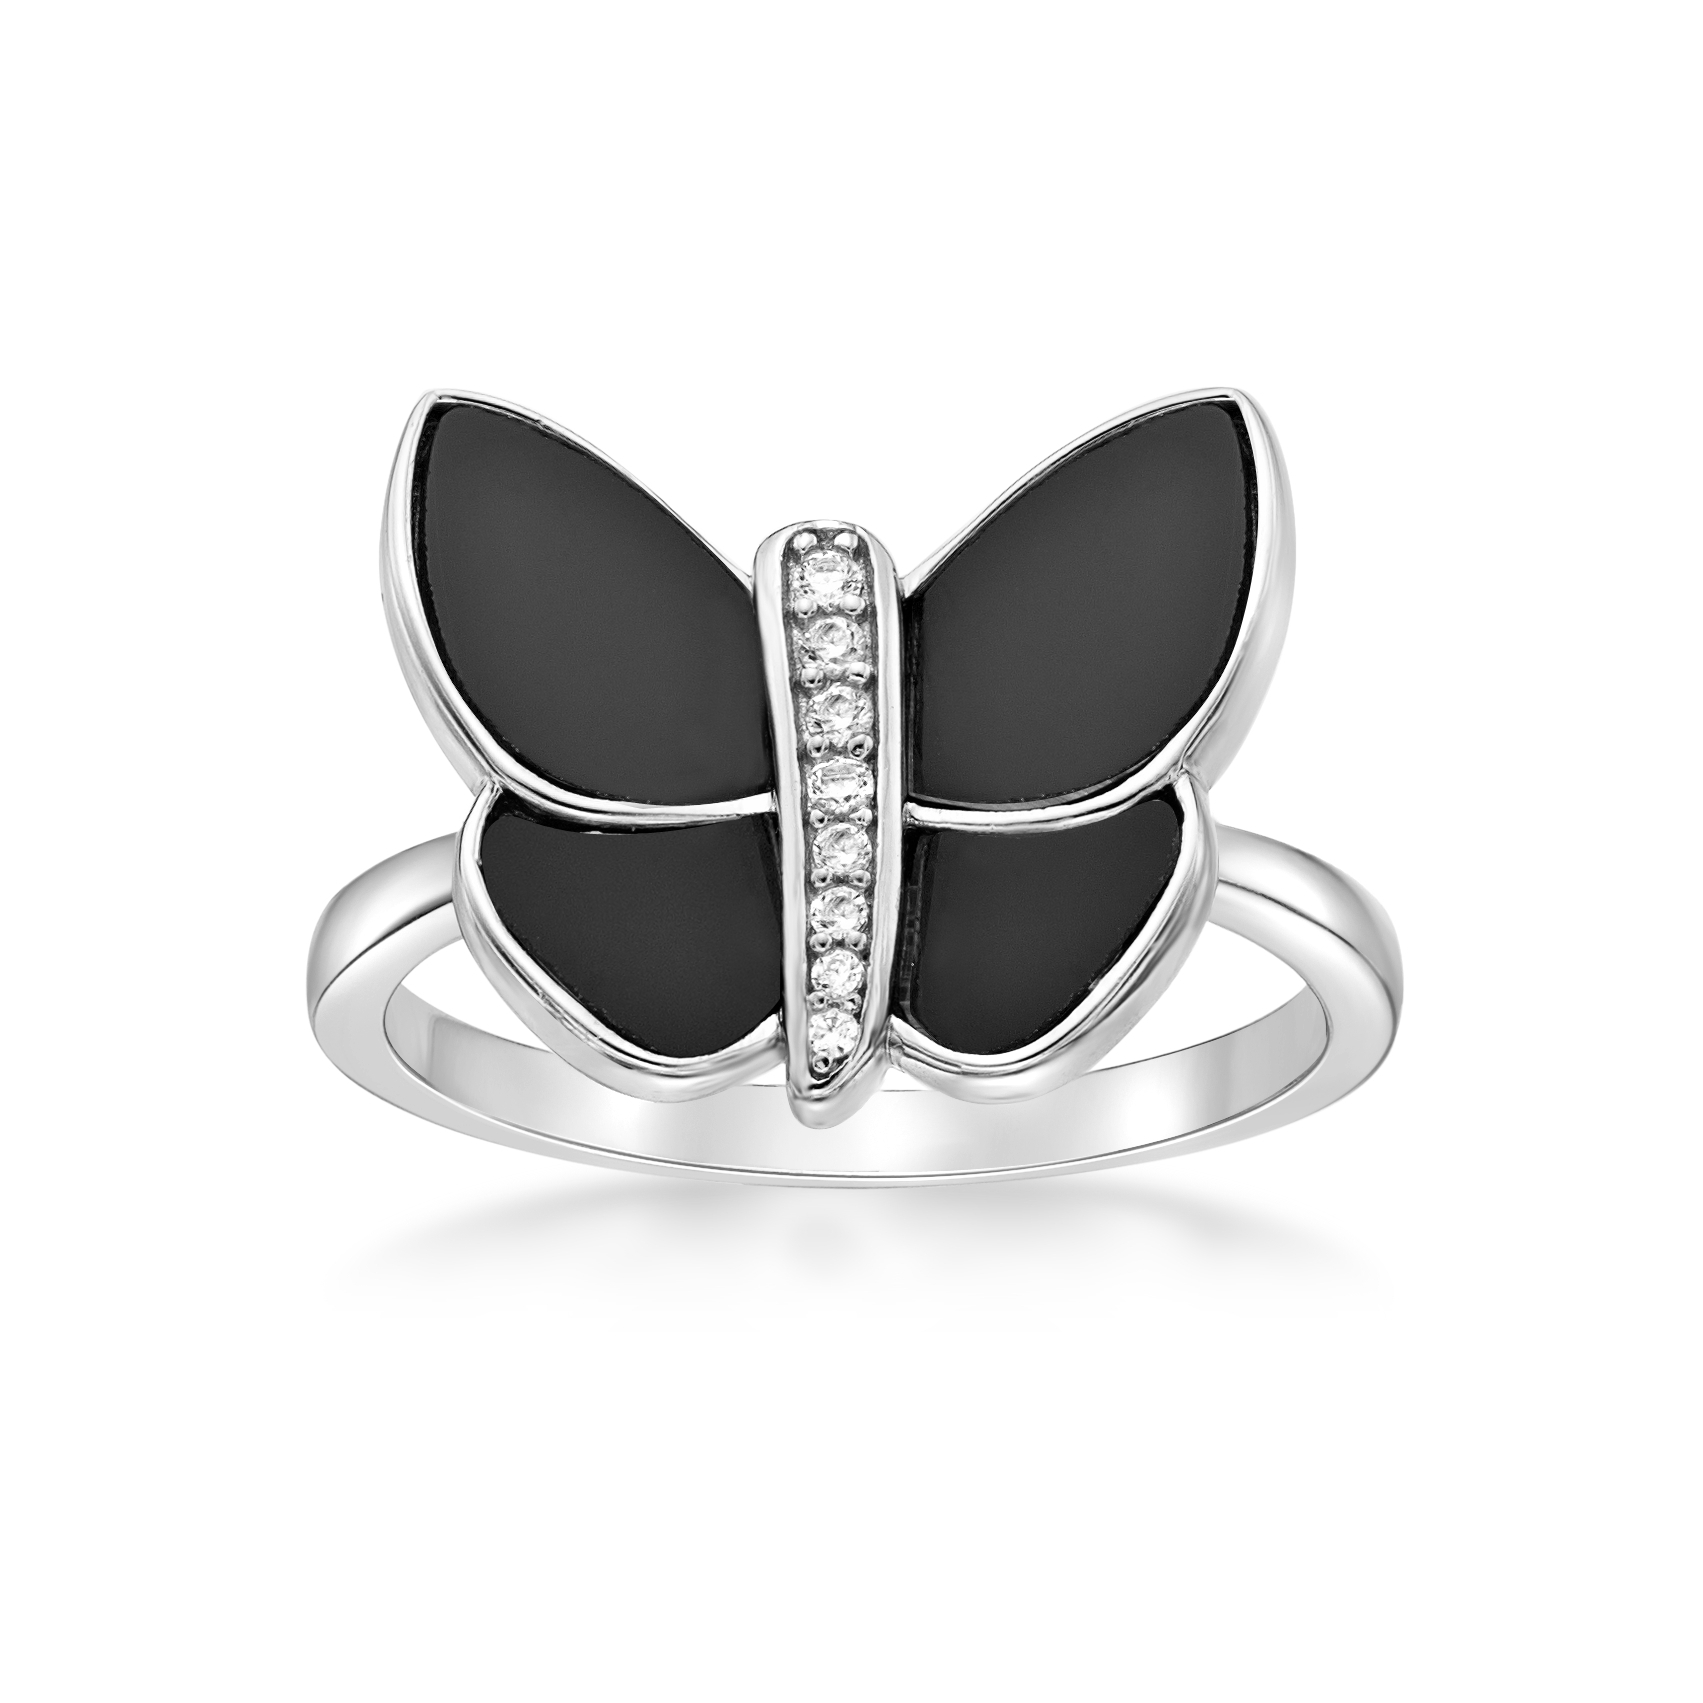 51164-ring-default-collection-sterling-silver-51164-1-1.jpg